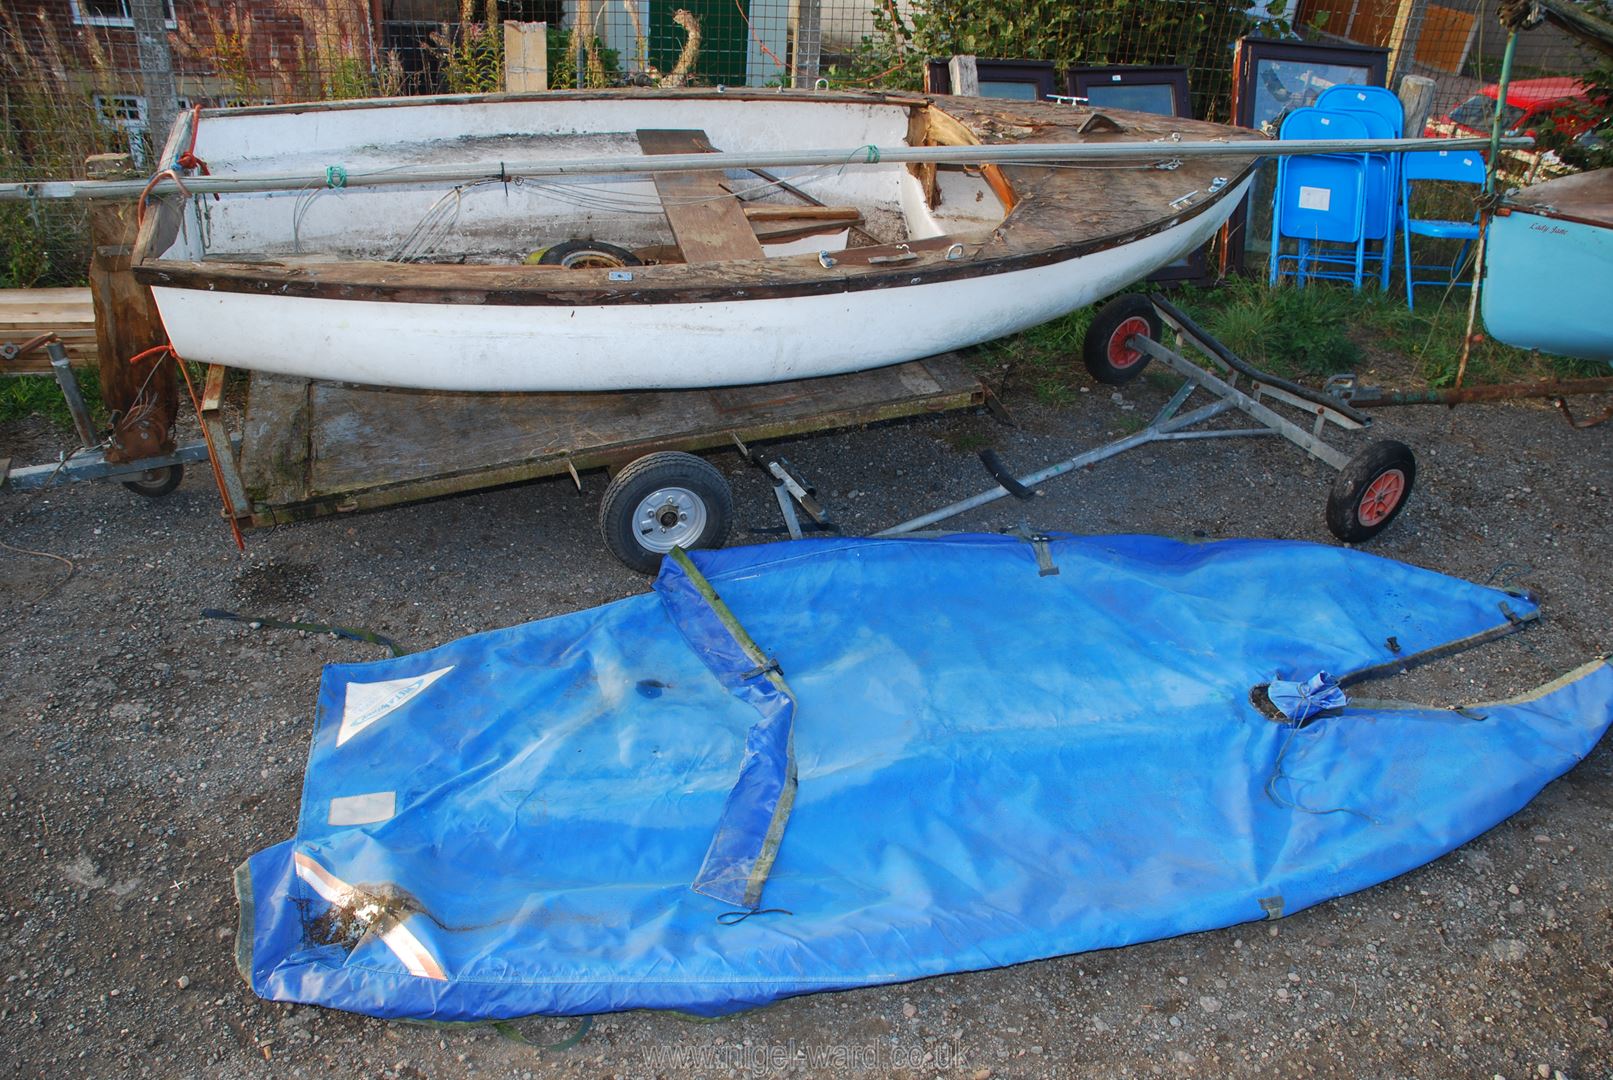 A glass fibre hulled sailing dinghy for restoration with 17' 2" high aluminium mast, fittings,